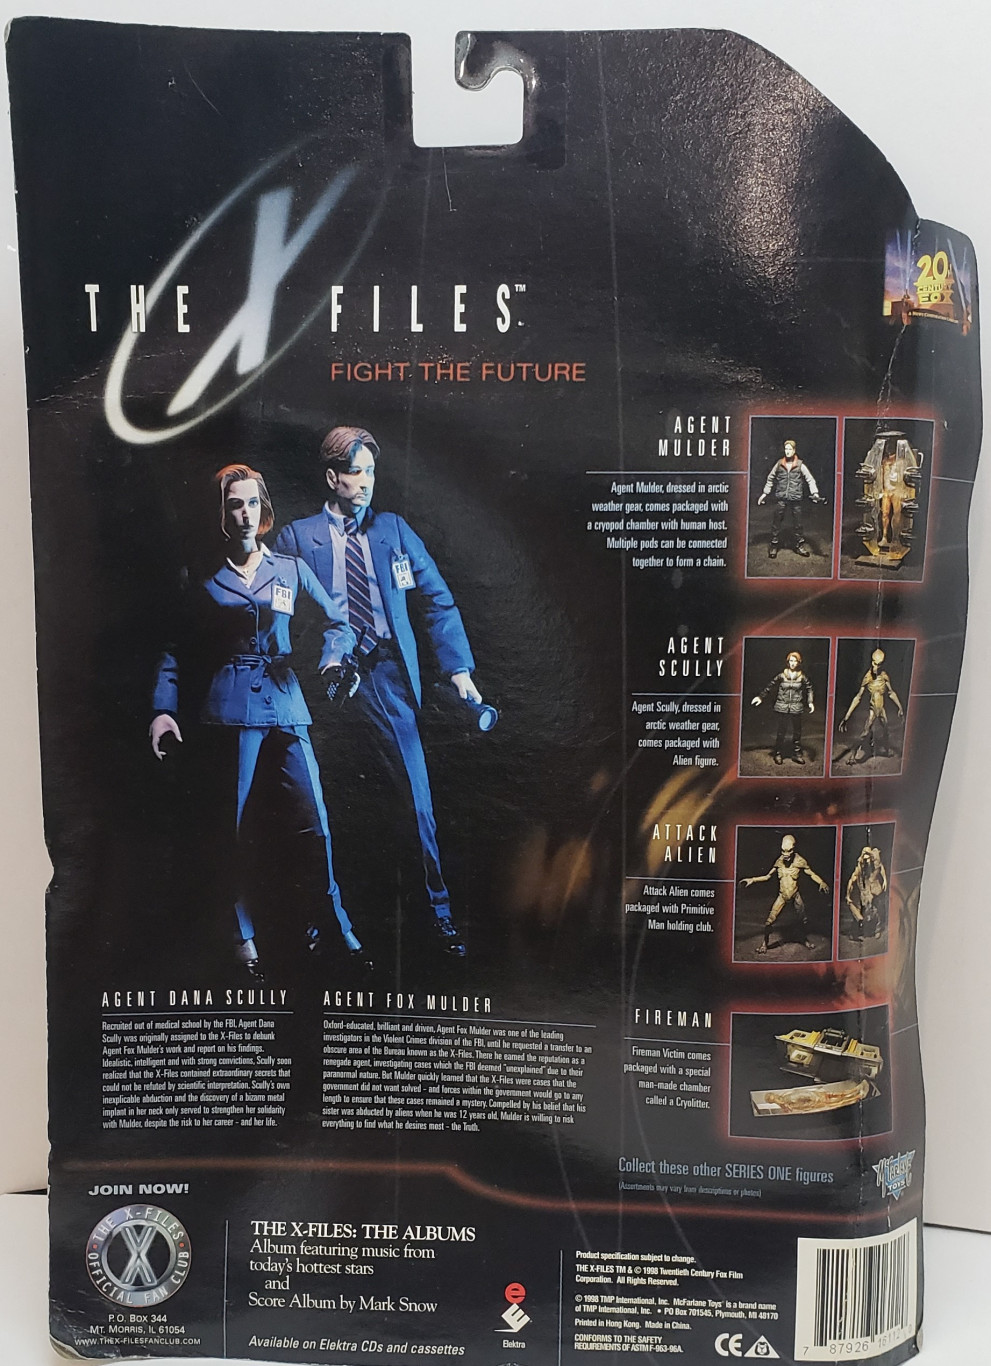 McFarlane Toys 1998 The X-Files Series 1 Agent Scully With Alien Action Figure for sale online